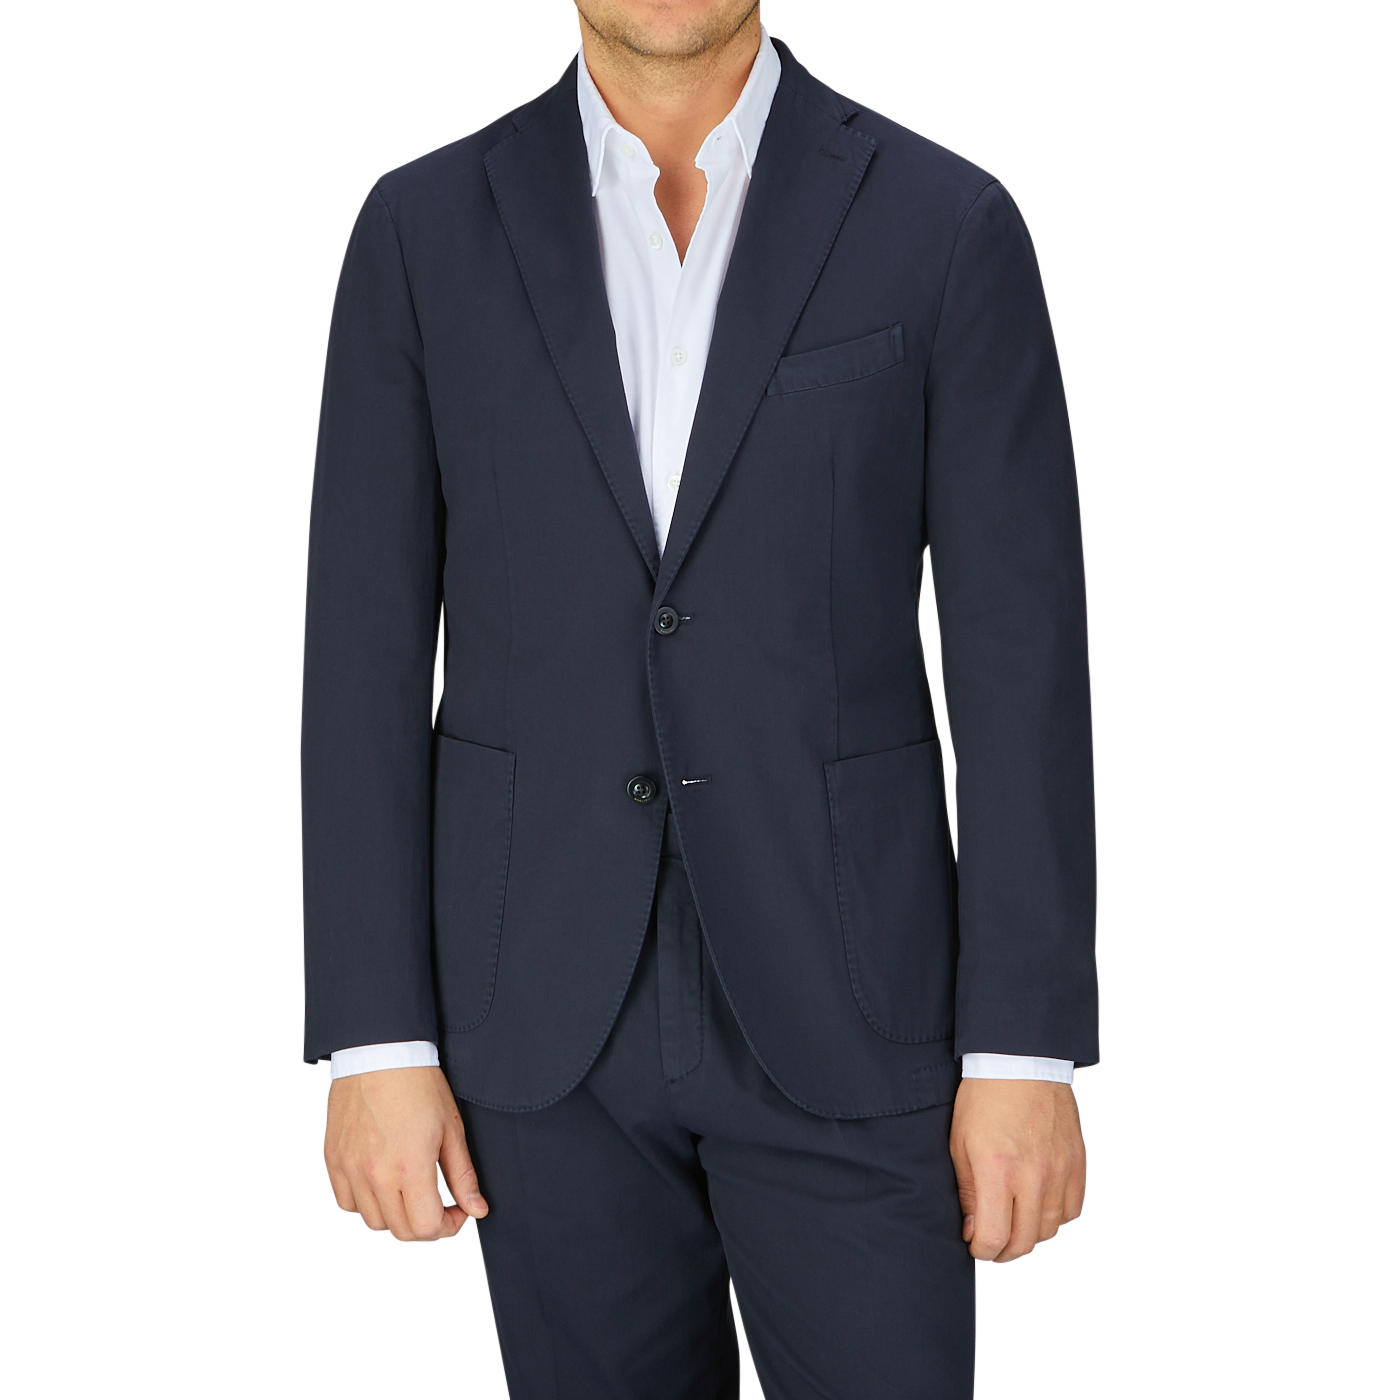 Man wearing an Italian Boglioli Navy Blue Washed Cotton K Jacket with unstructured craftsmanship, fashioned in navy blue and paired with a white shirt.